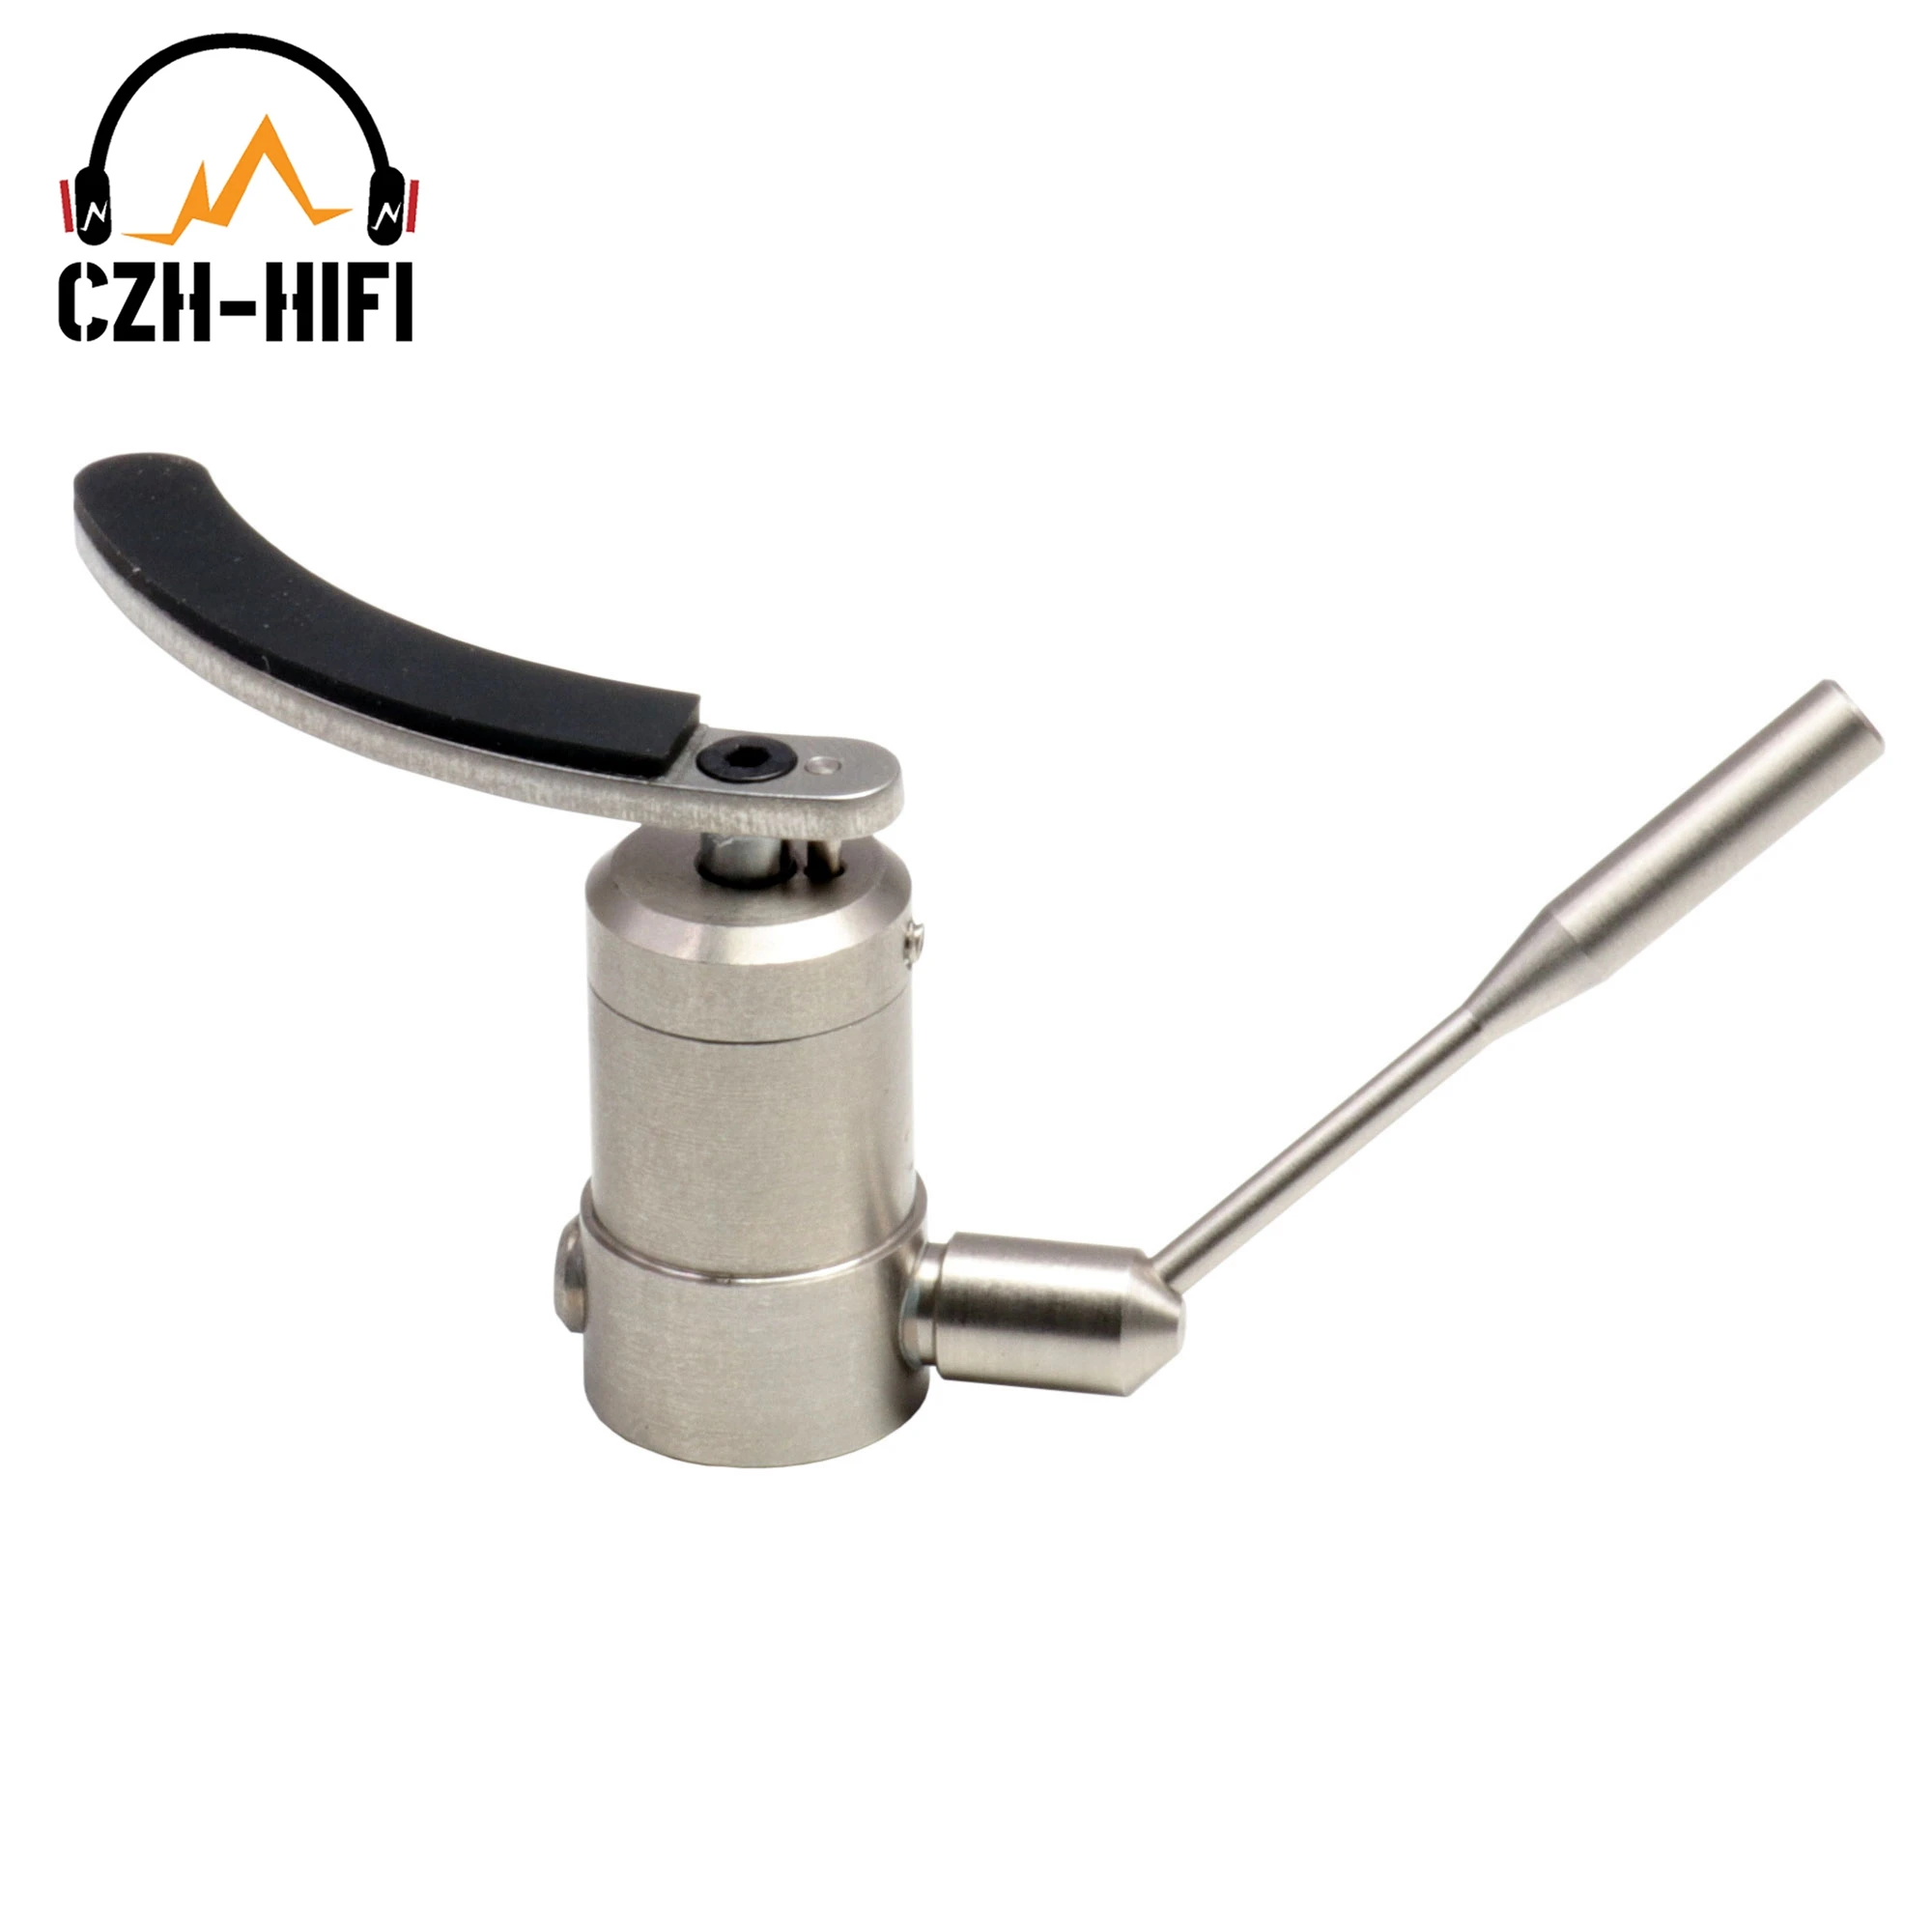 Enlarge 1PC Brand New EIZZ High End Tonearm Arm Lifter for LP Turntable Recorder Player DISC Vinyl Phono HiFi Audio DIY